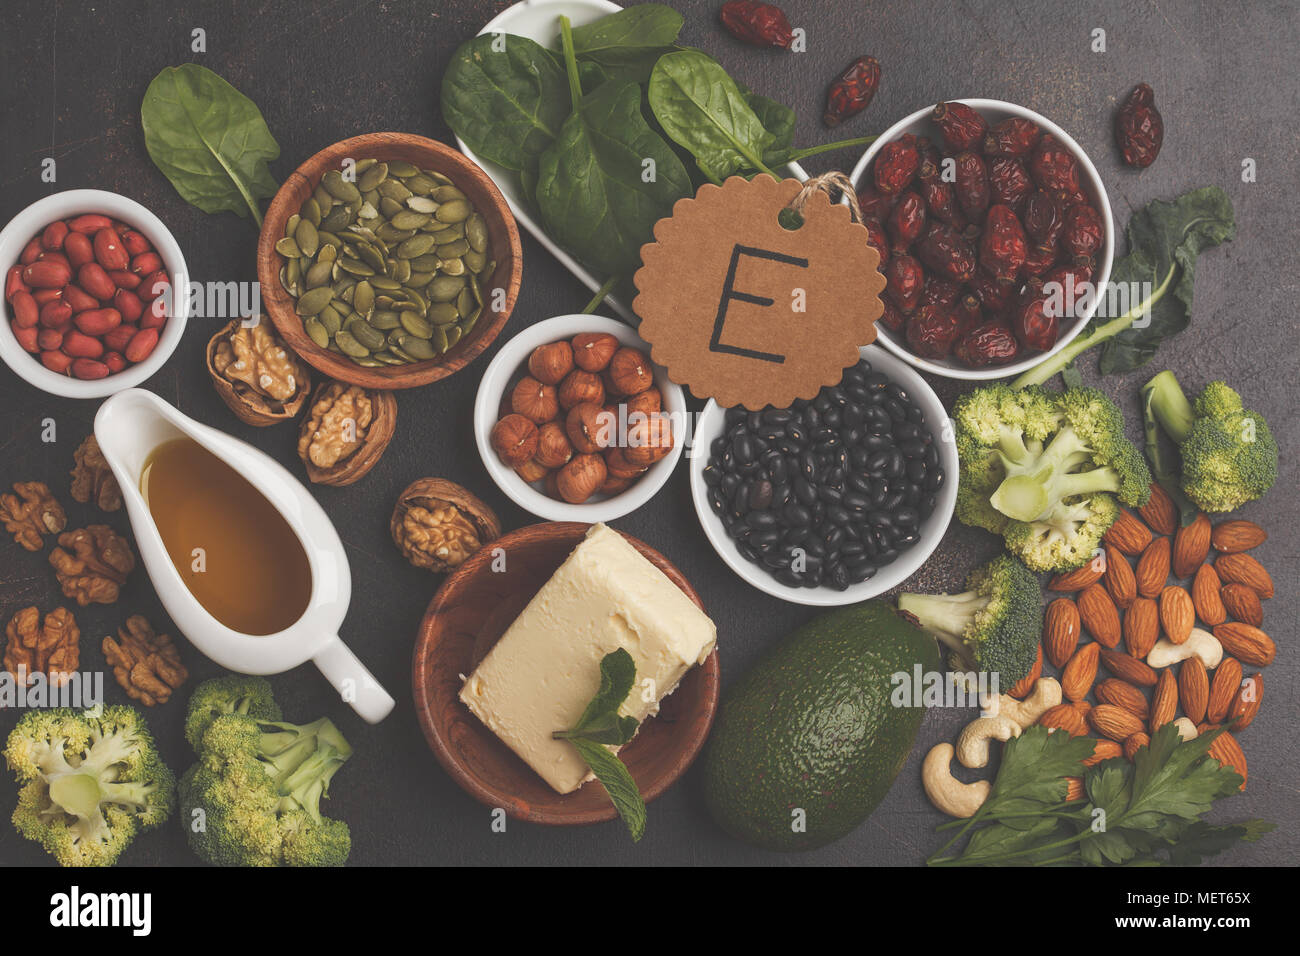 Healthy food nutrition dieting concept. Assortment of high vitamin E sources. Oil, nuts, avocado, butter, healthy fats, dark background Stock Photo